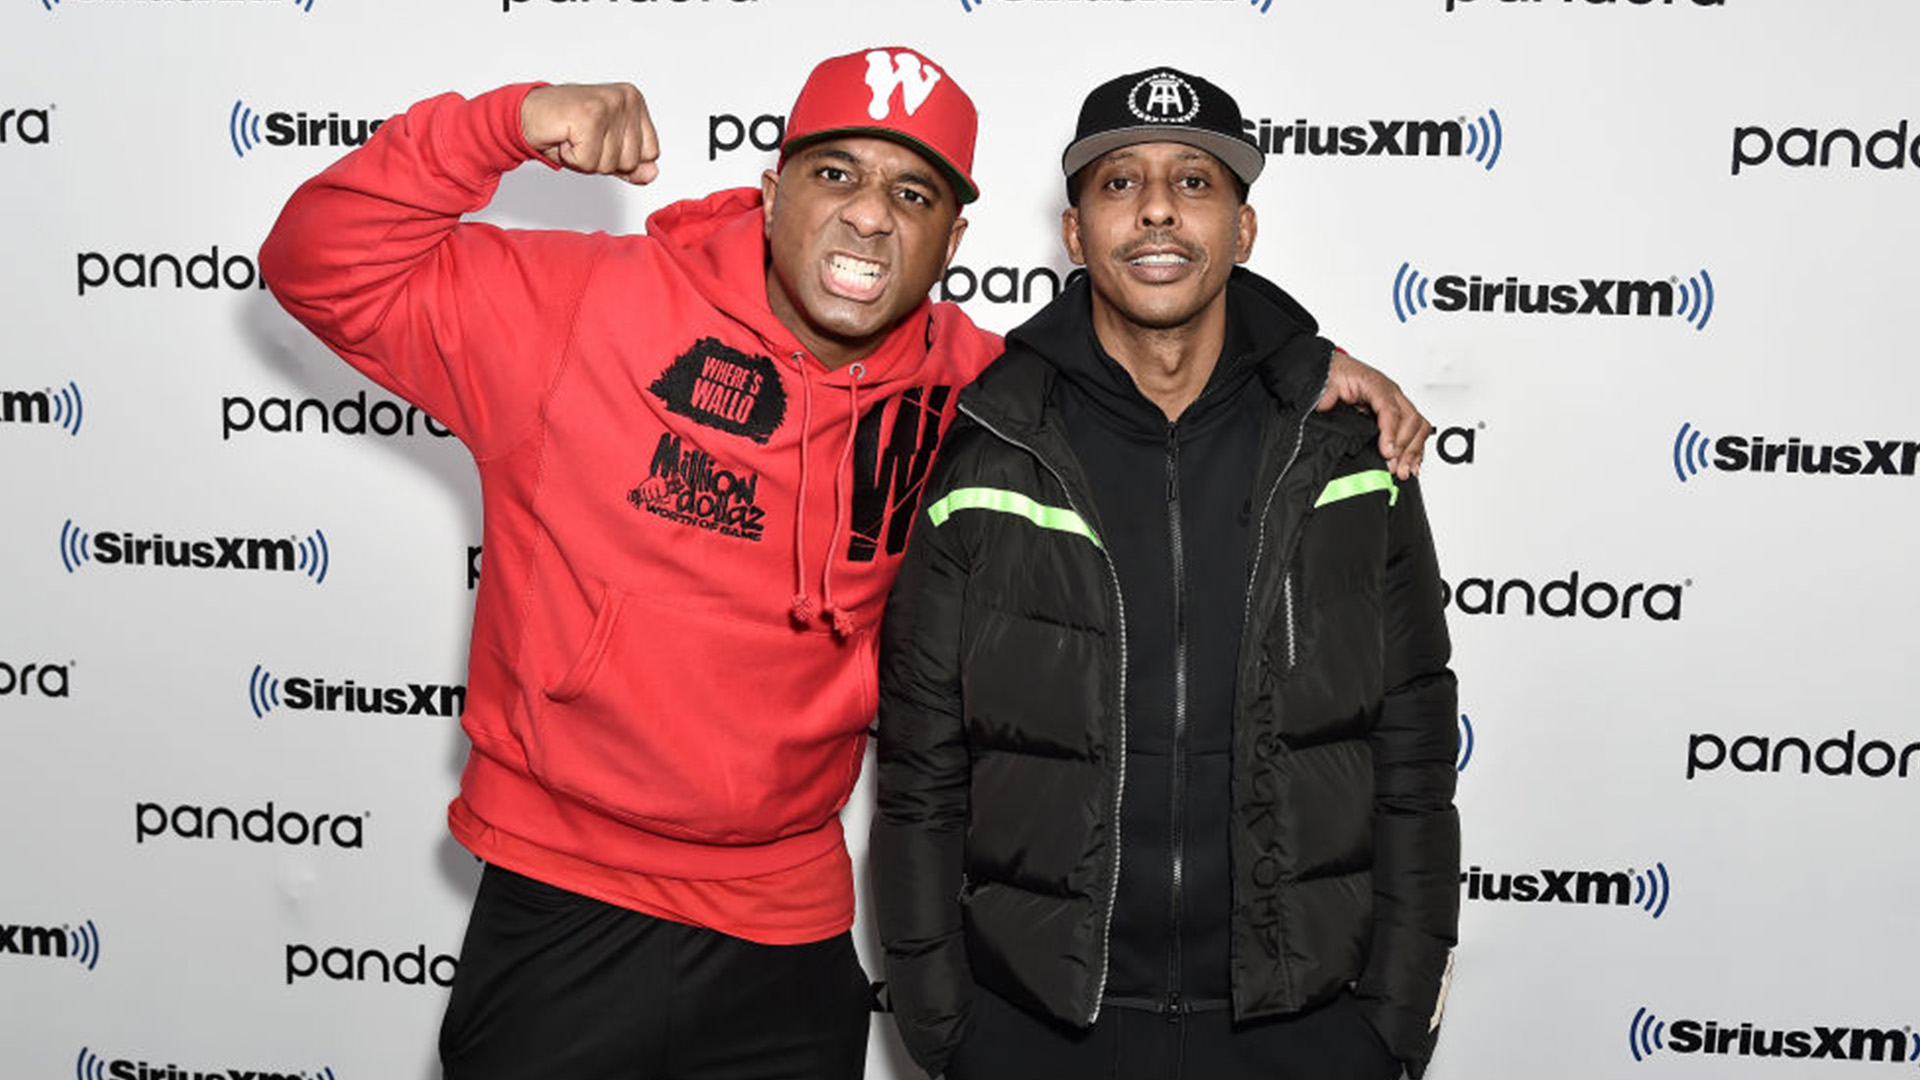 'They Wanted To Own Us' — Gillie Da King, Wallo267 Reveal They Declined A Multi-Million-Dollar Spotify Deal Because Of Intellectual Property